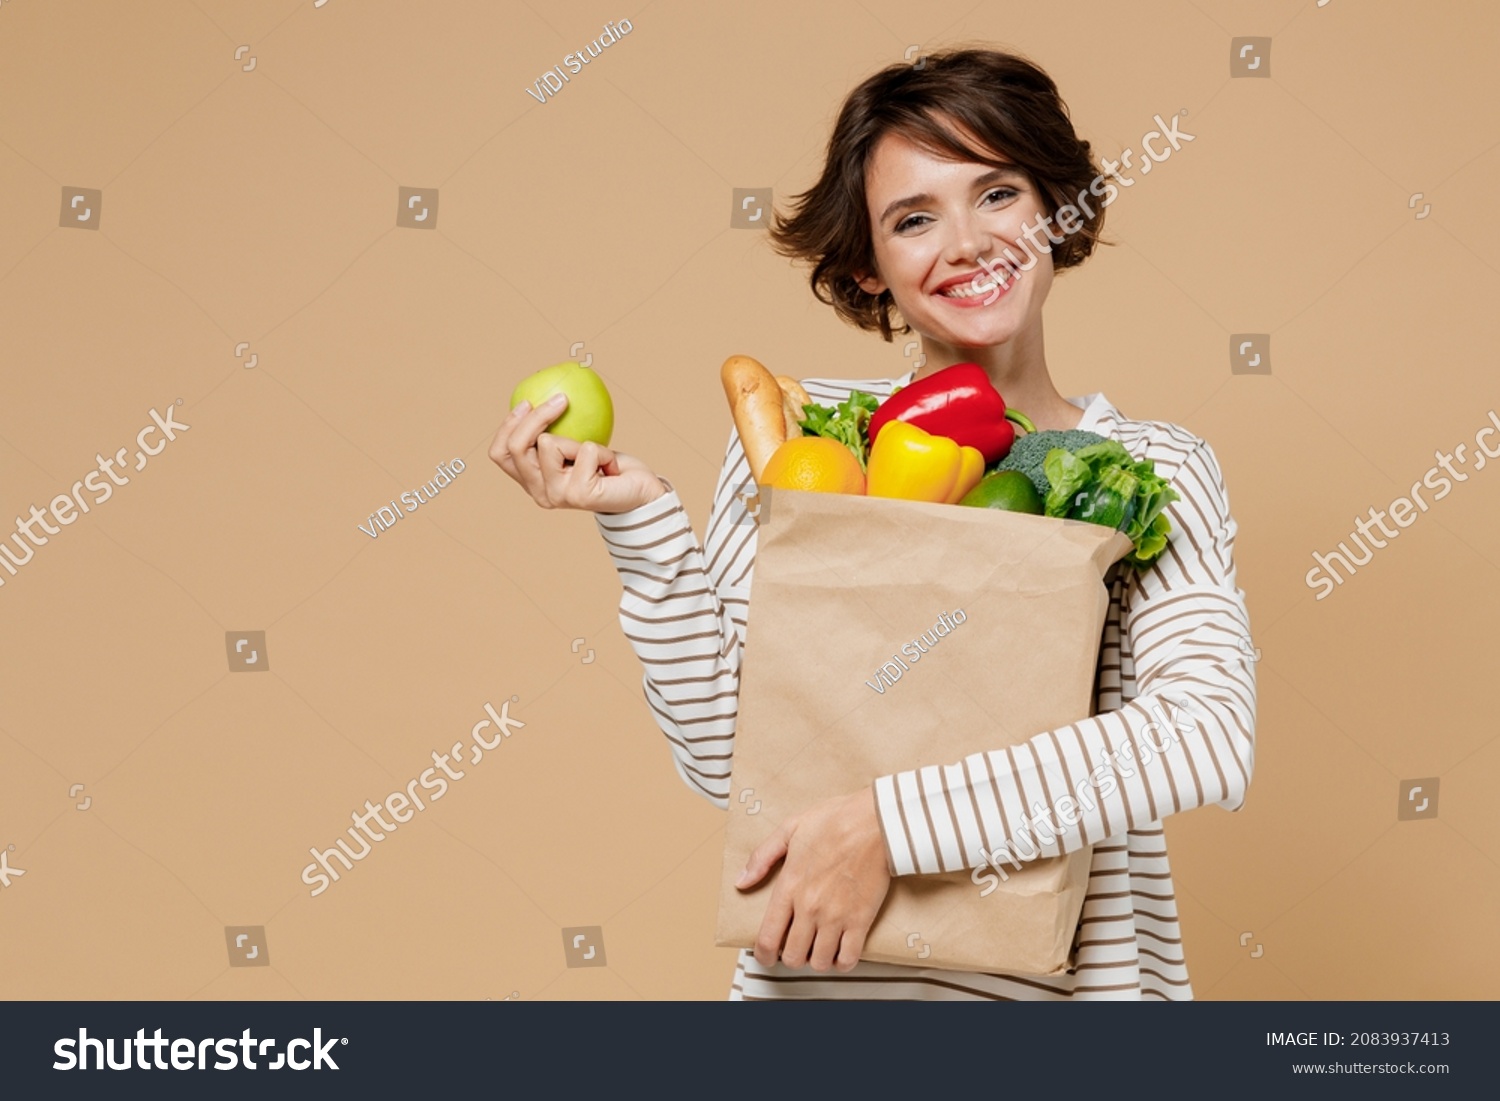 Young smiling vegetarian cheerful woman 20s in casual clothes hold paper bag with vegetables holding apple fruit eating isolated on plain pastel beige background studio portrait. Shopping concept. #2083937413